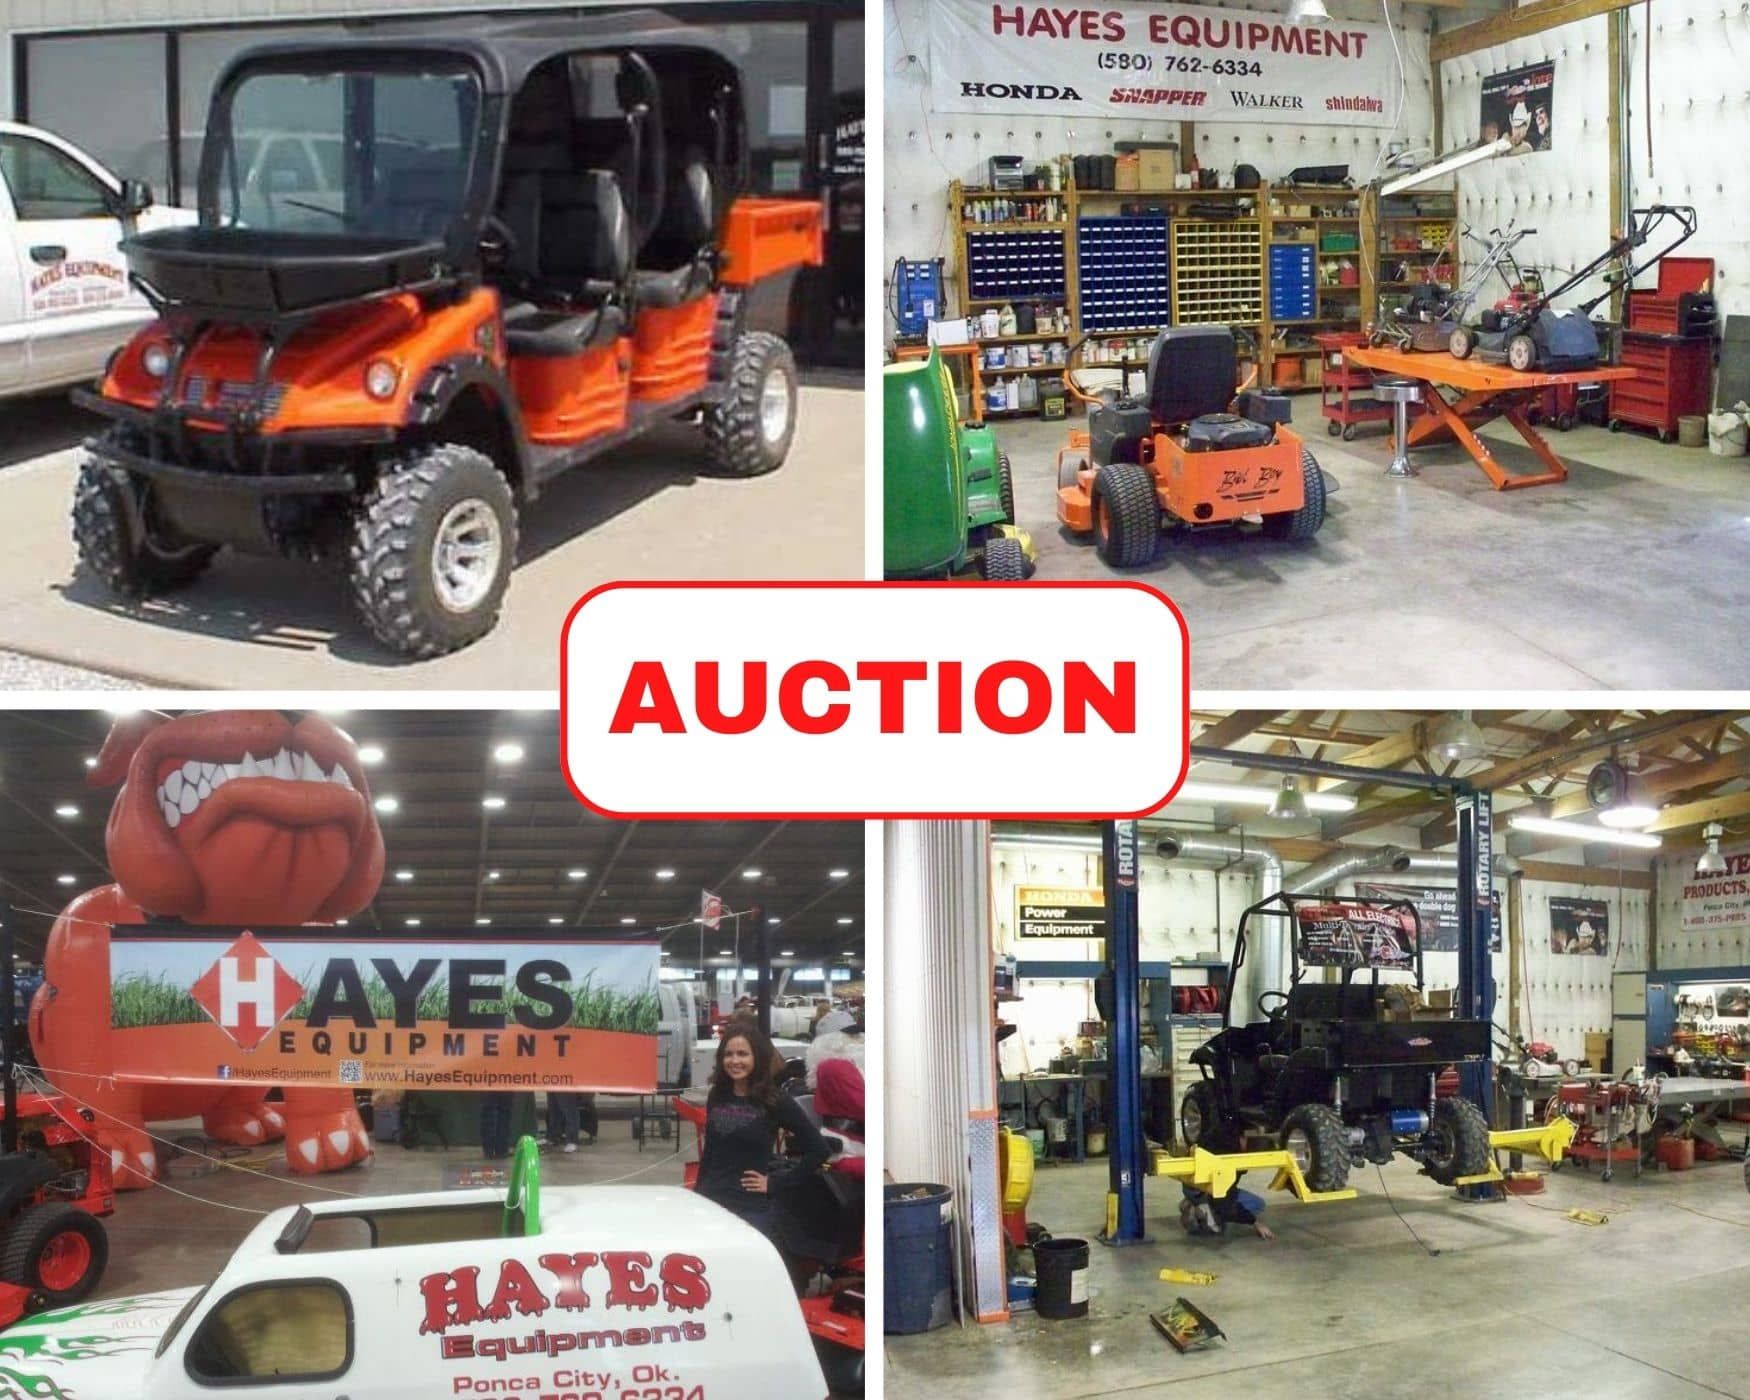 collage of items in auction including side by side utility vehicle and shop equipment tools